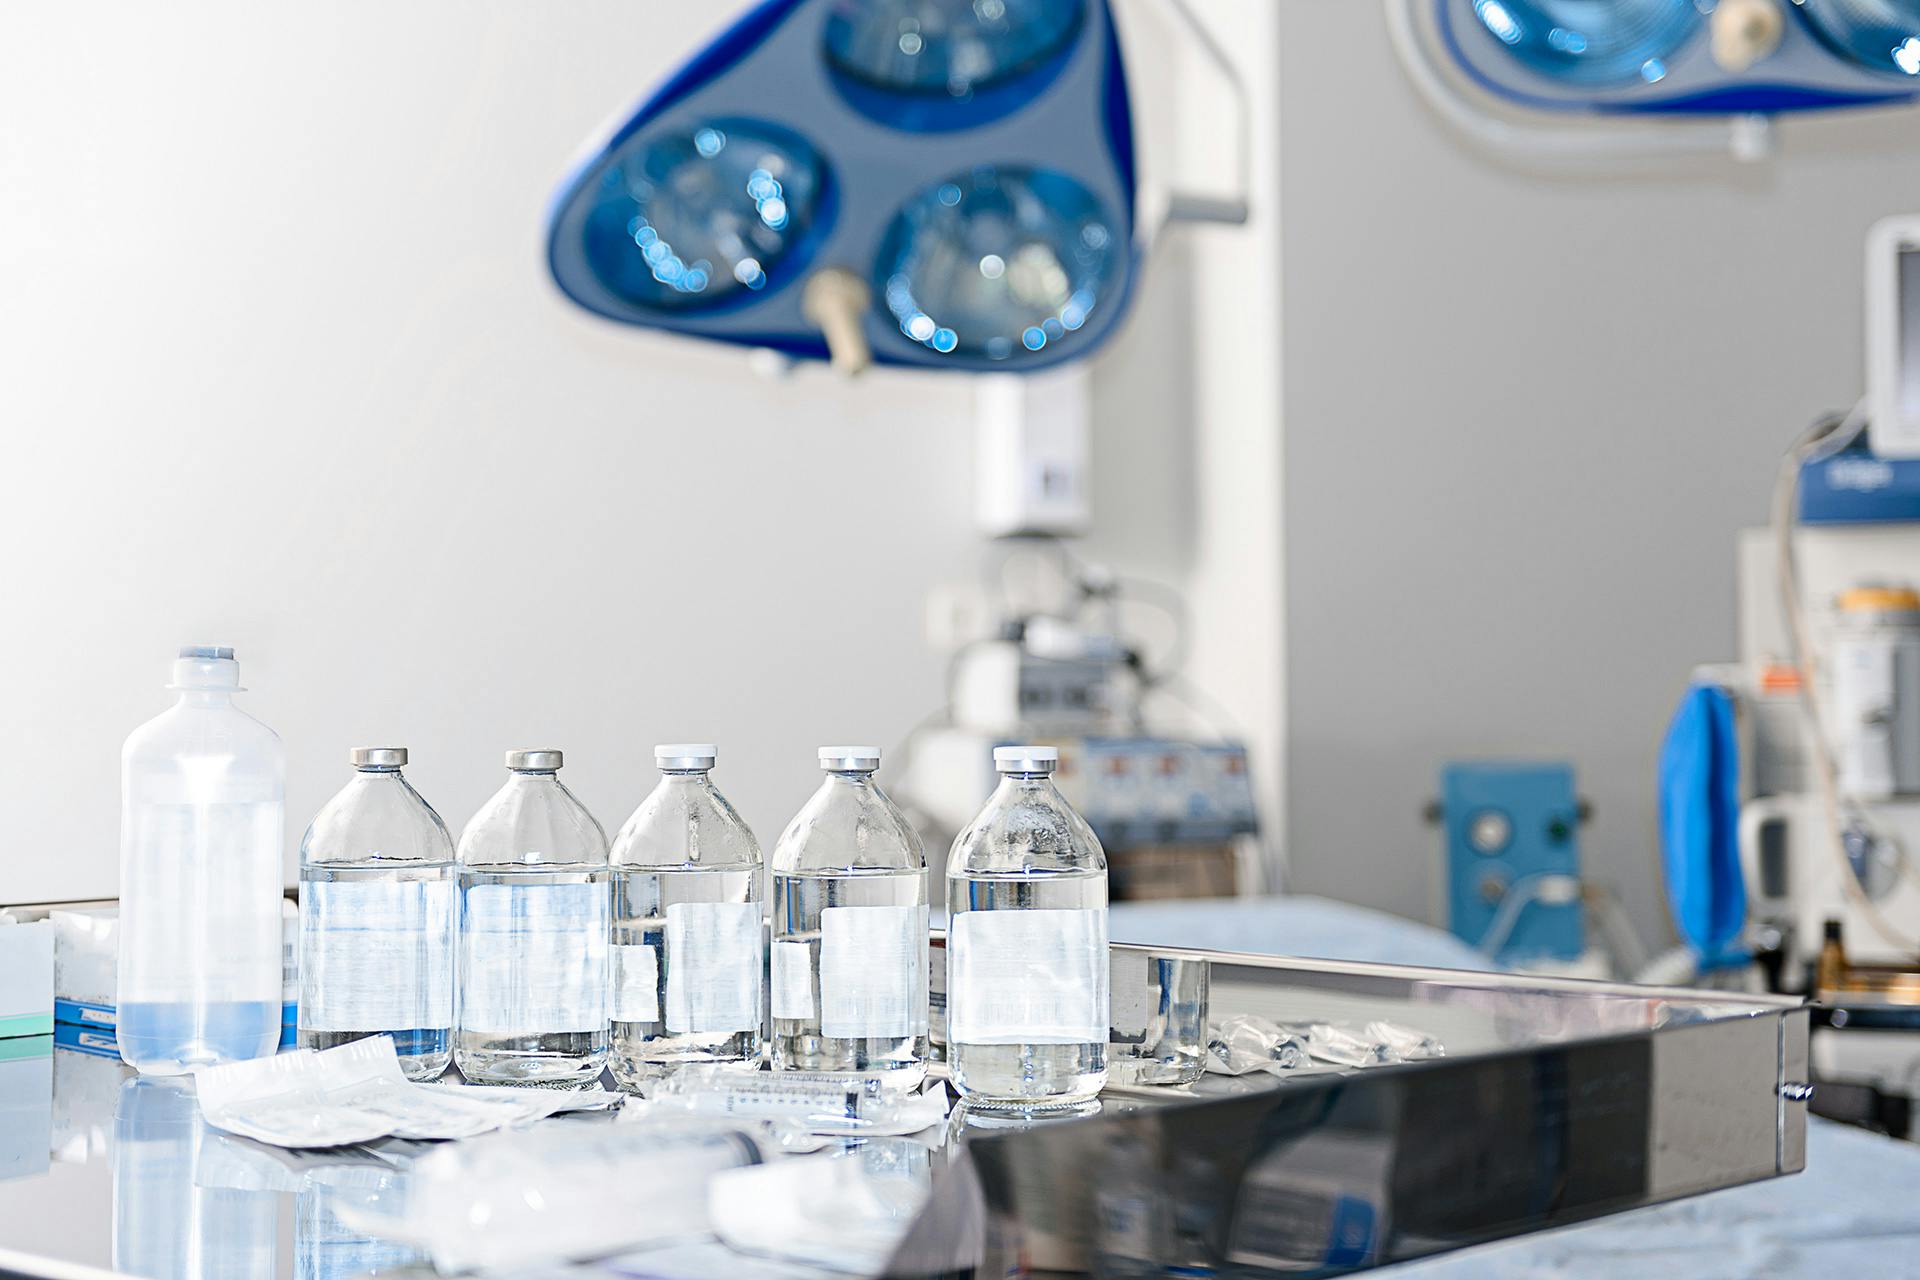 Minimize false rejects with automated vial inspection